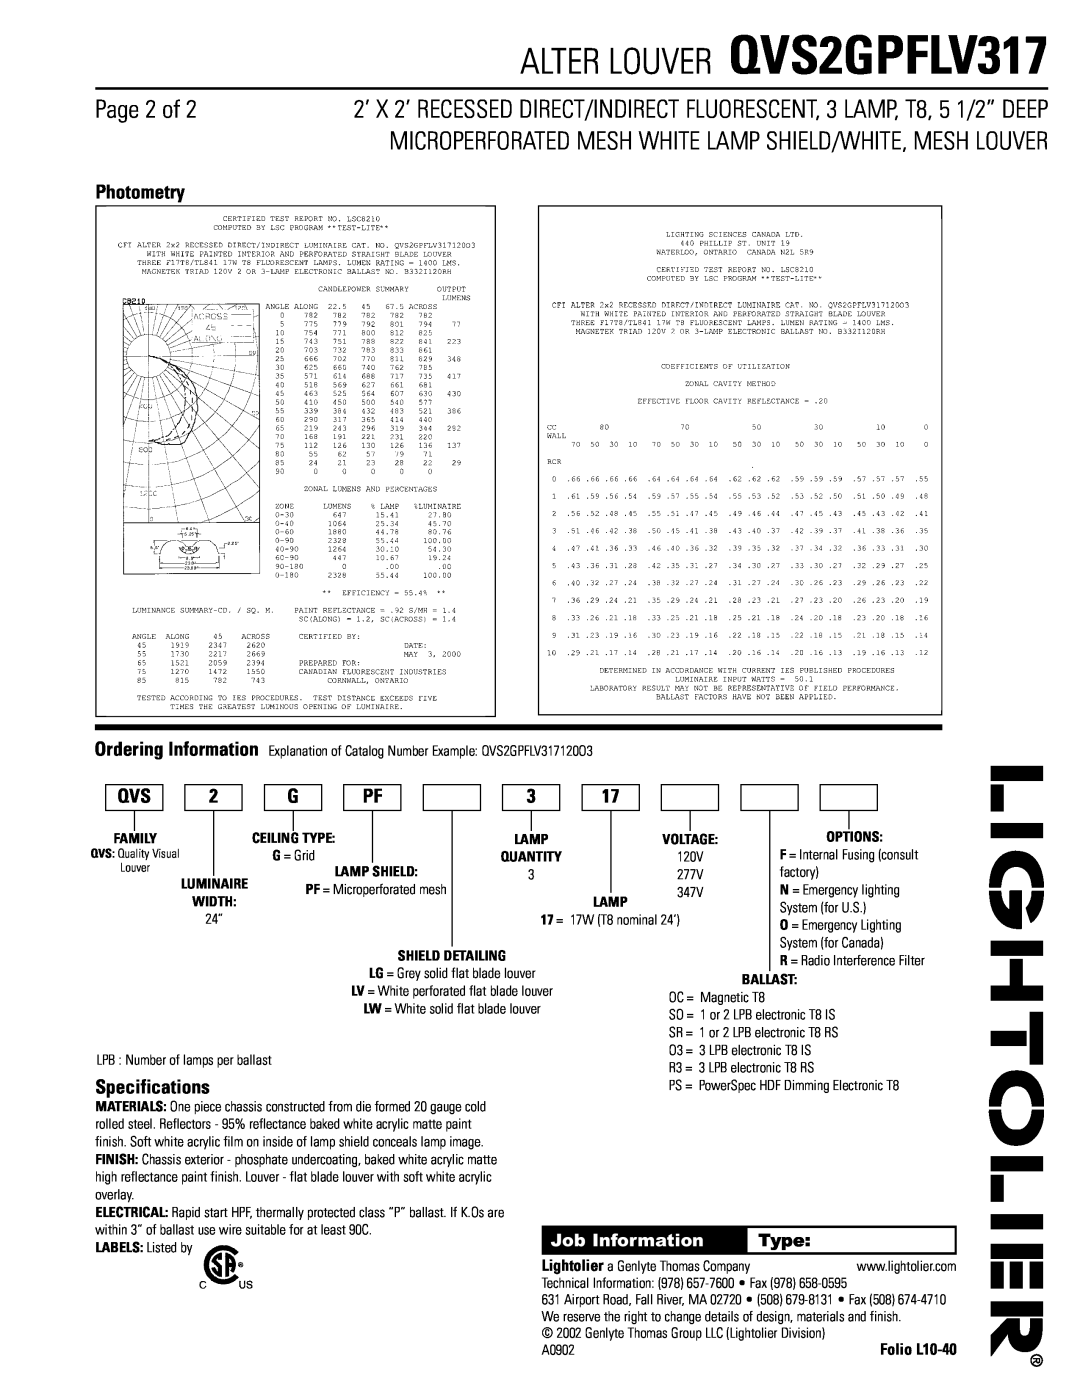 Lightolier Page 2 of, Photometry, Specifications, ALTER LOUVER QVS2GPFLV317, Job Information, Type, Options, Width 